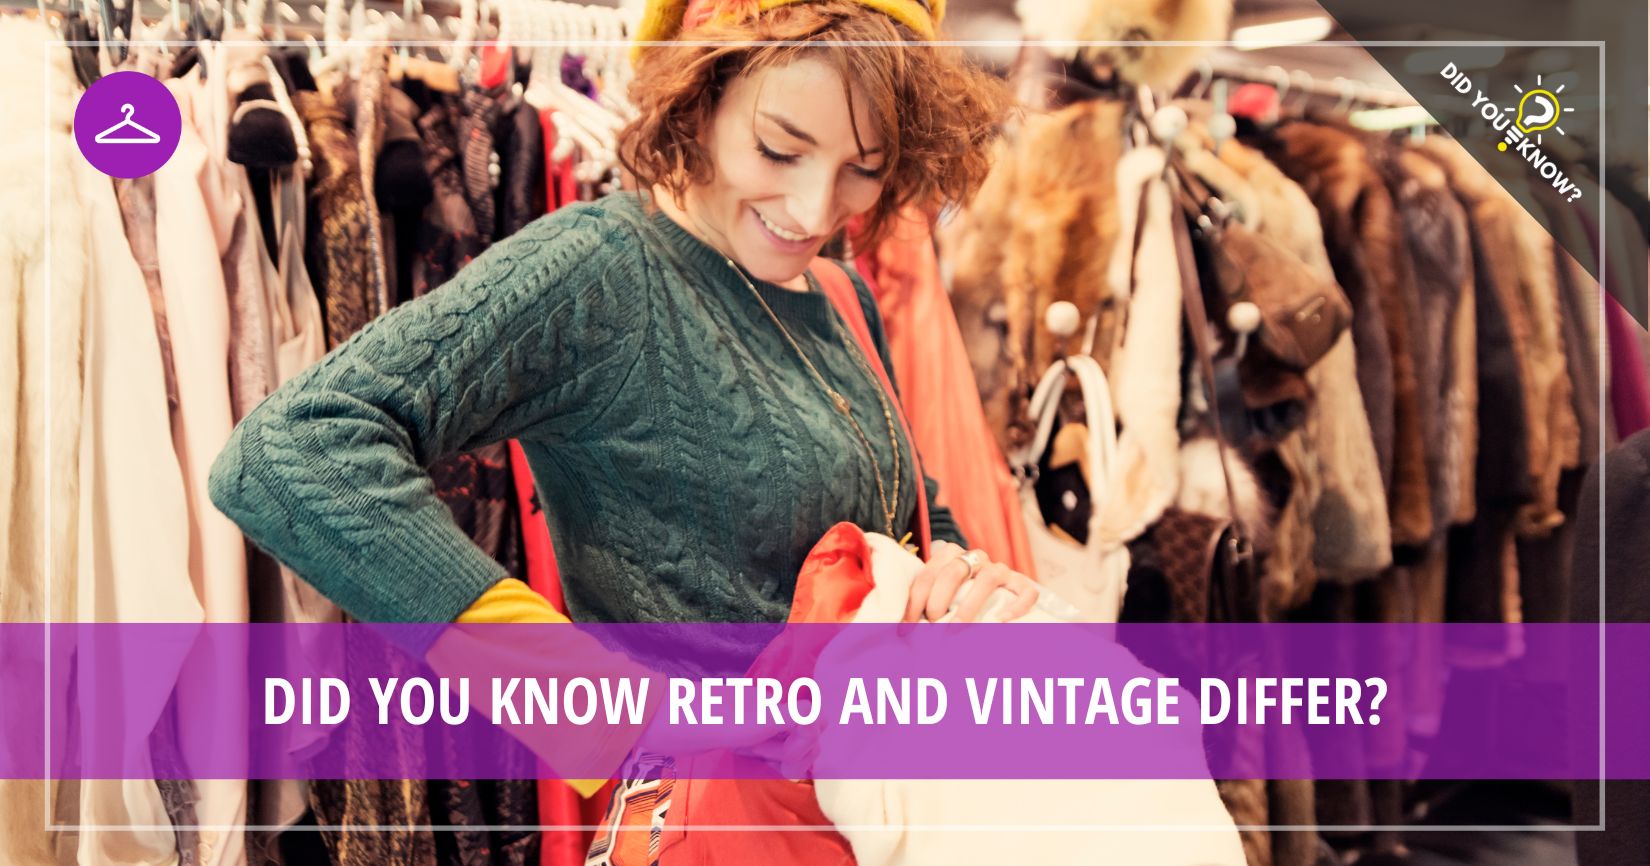 Retro and Vintage – Not the Same - Did You Know?